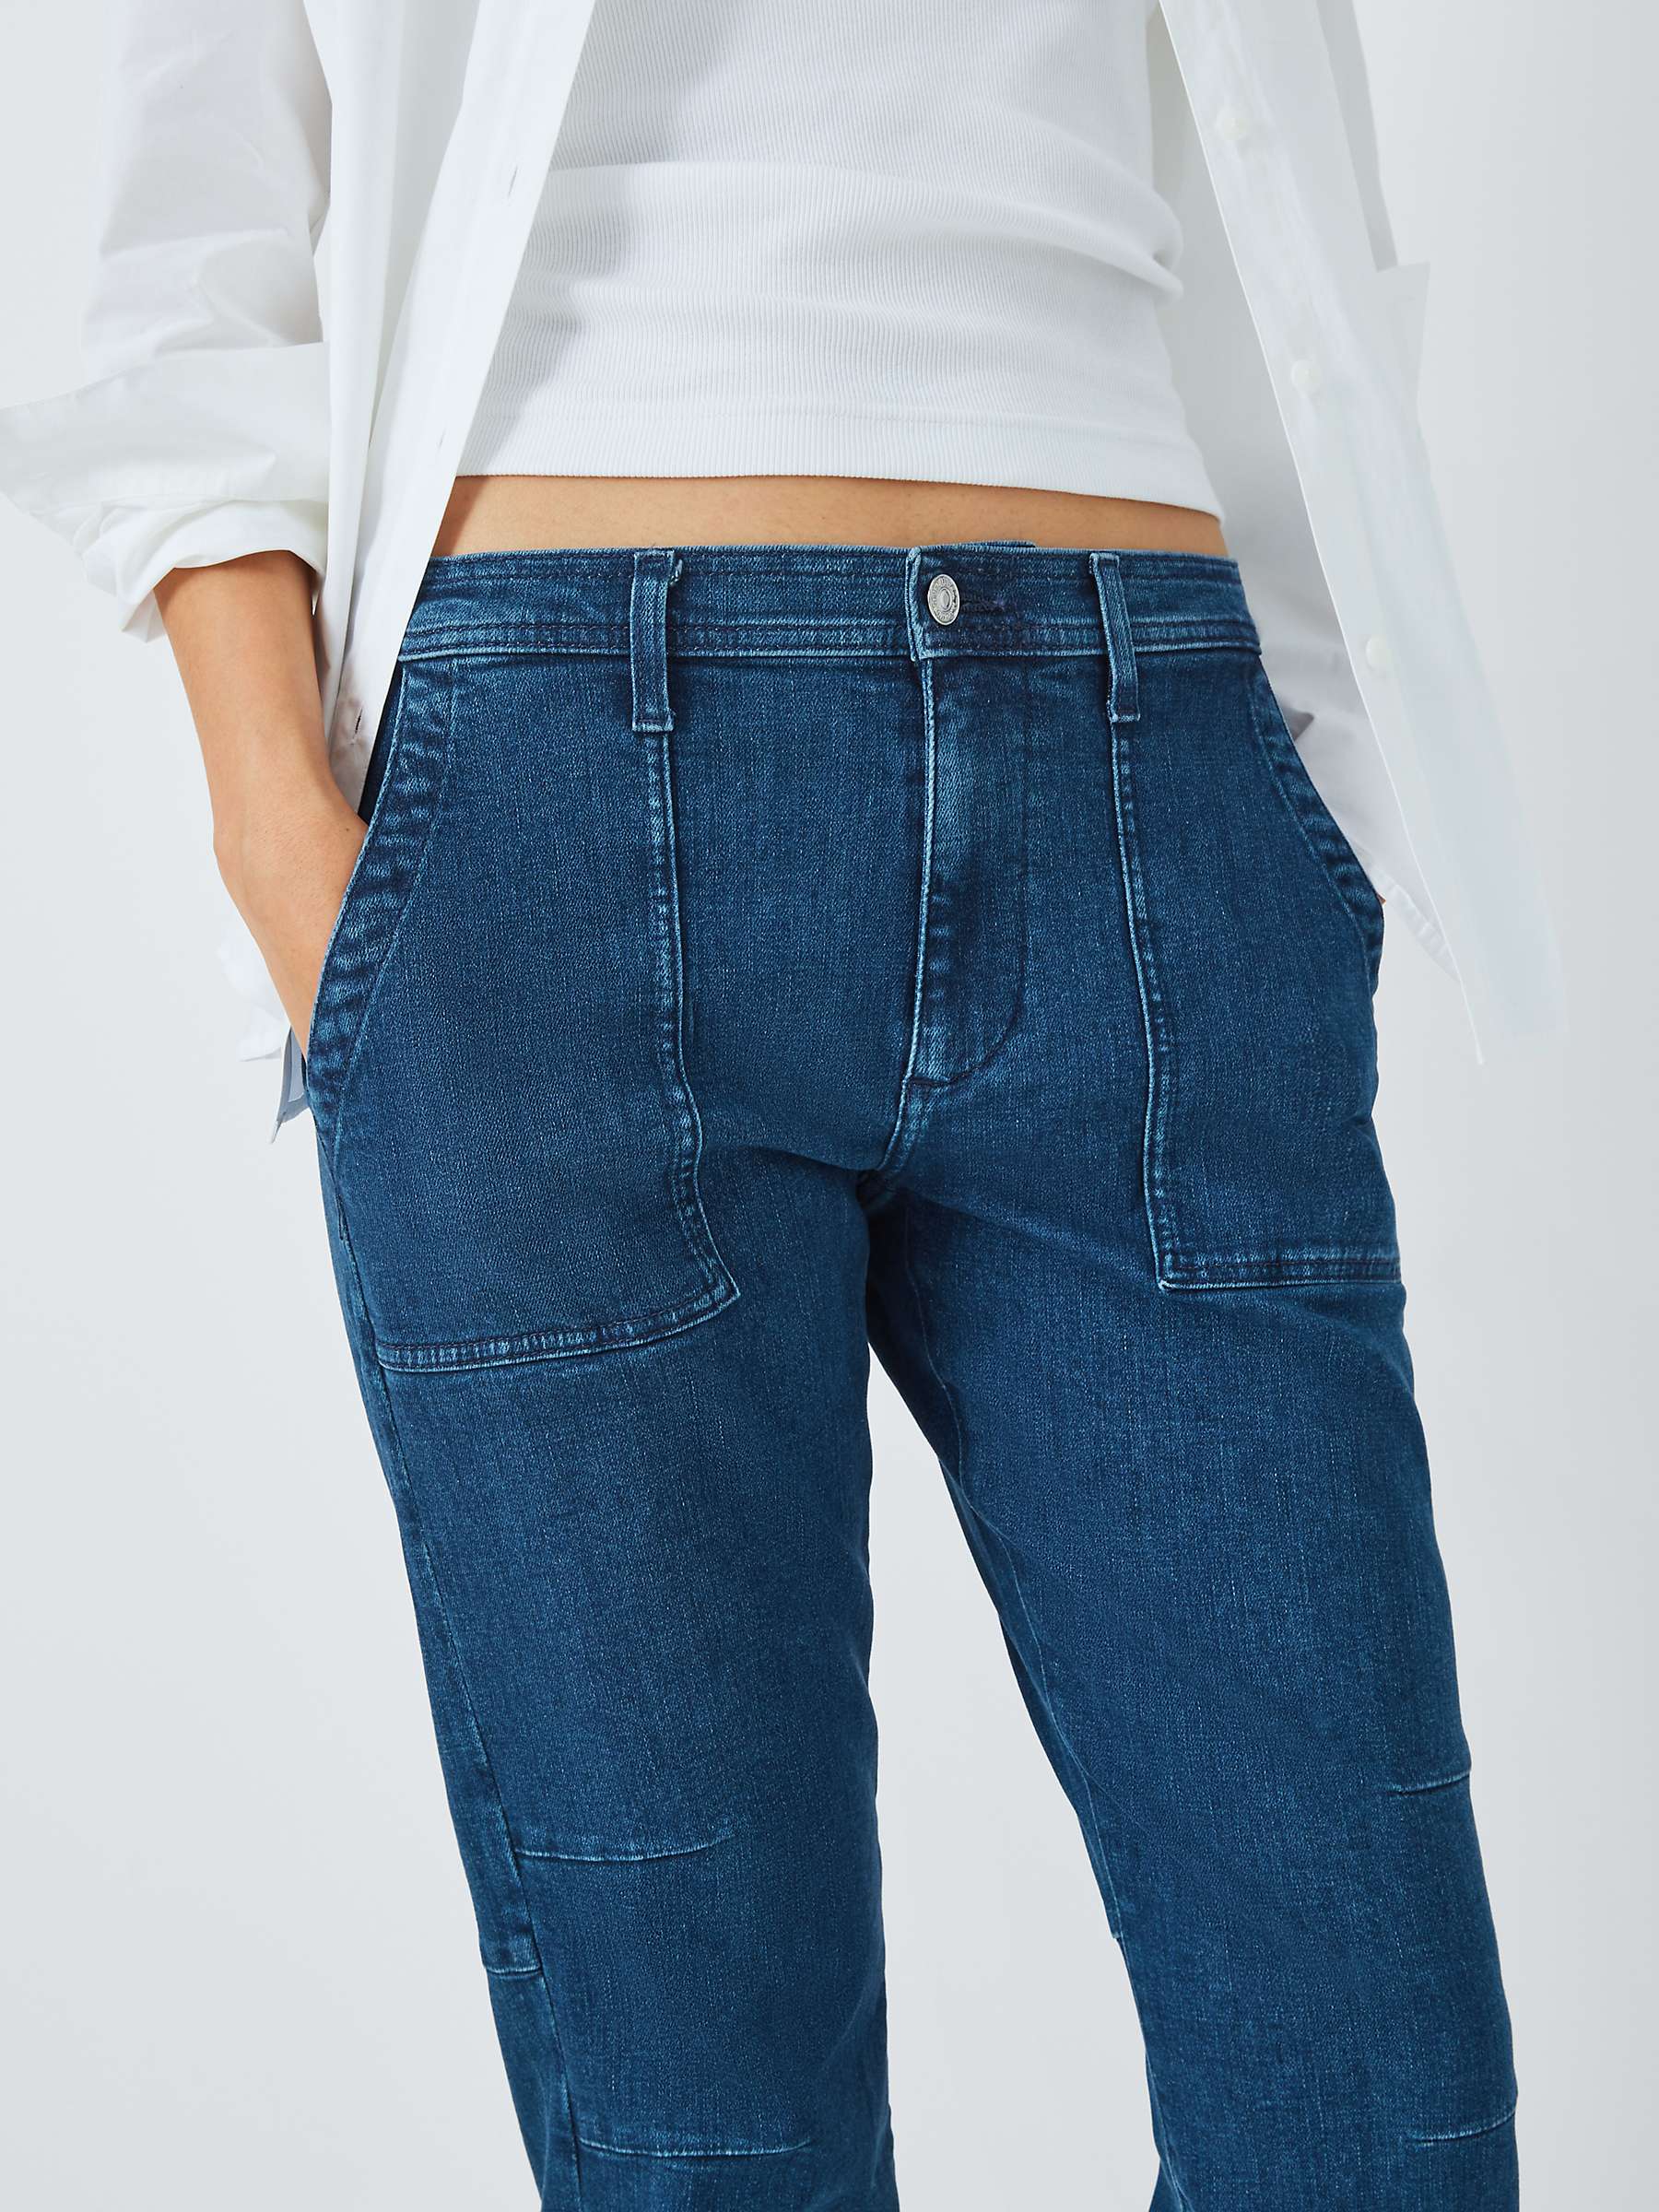 Buy 7 For All Mankind Darted Boyfriend Jogger Jeans, Slim Illusion Saturday Online at johnlewis.com